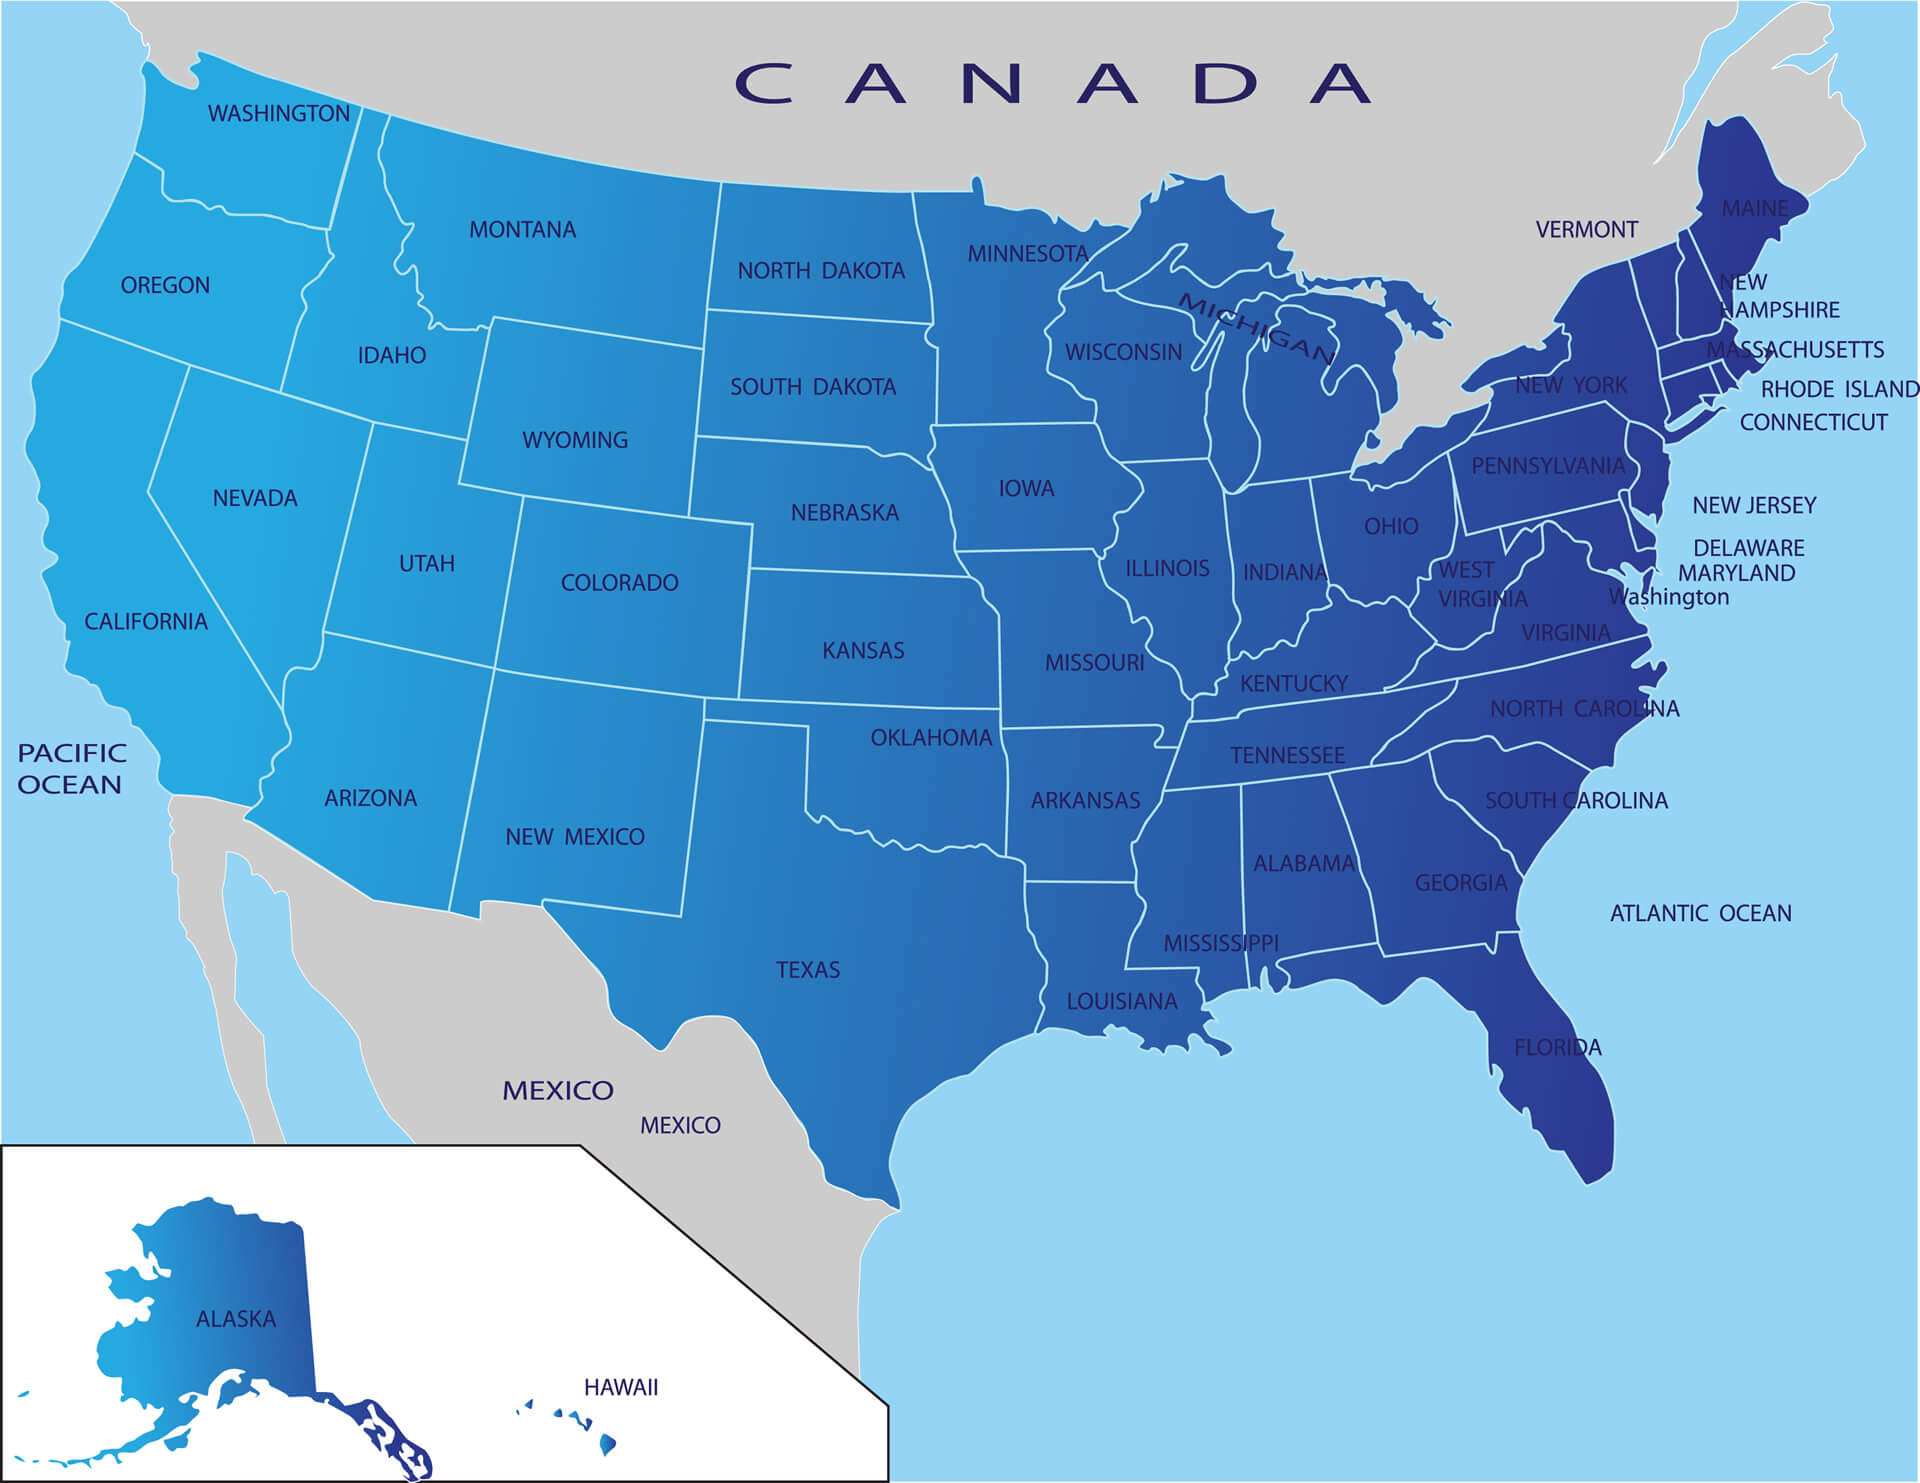 United States of America Physical Map